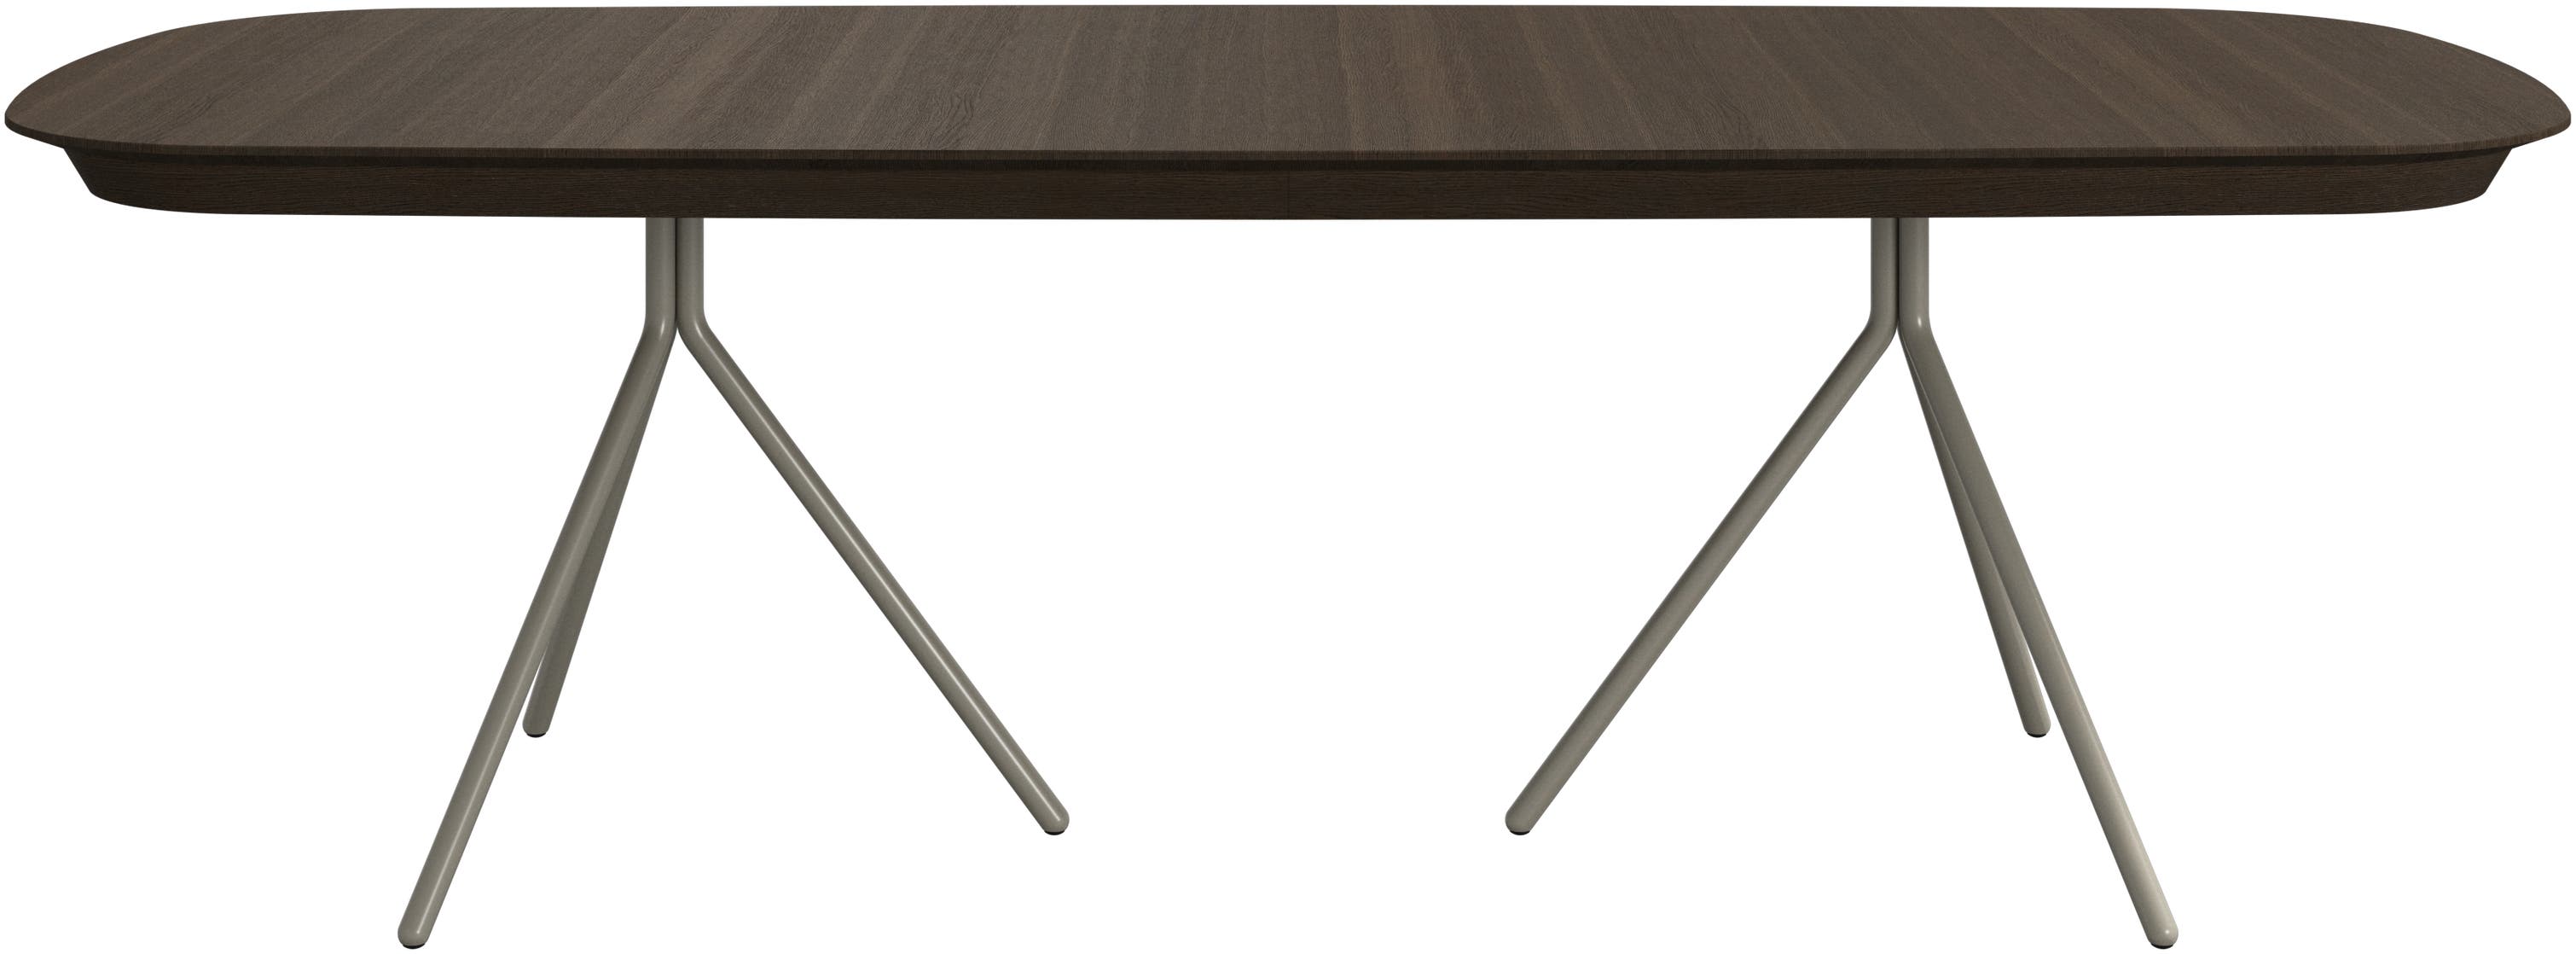 Ottawa extendable dining table